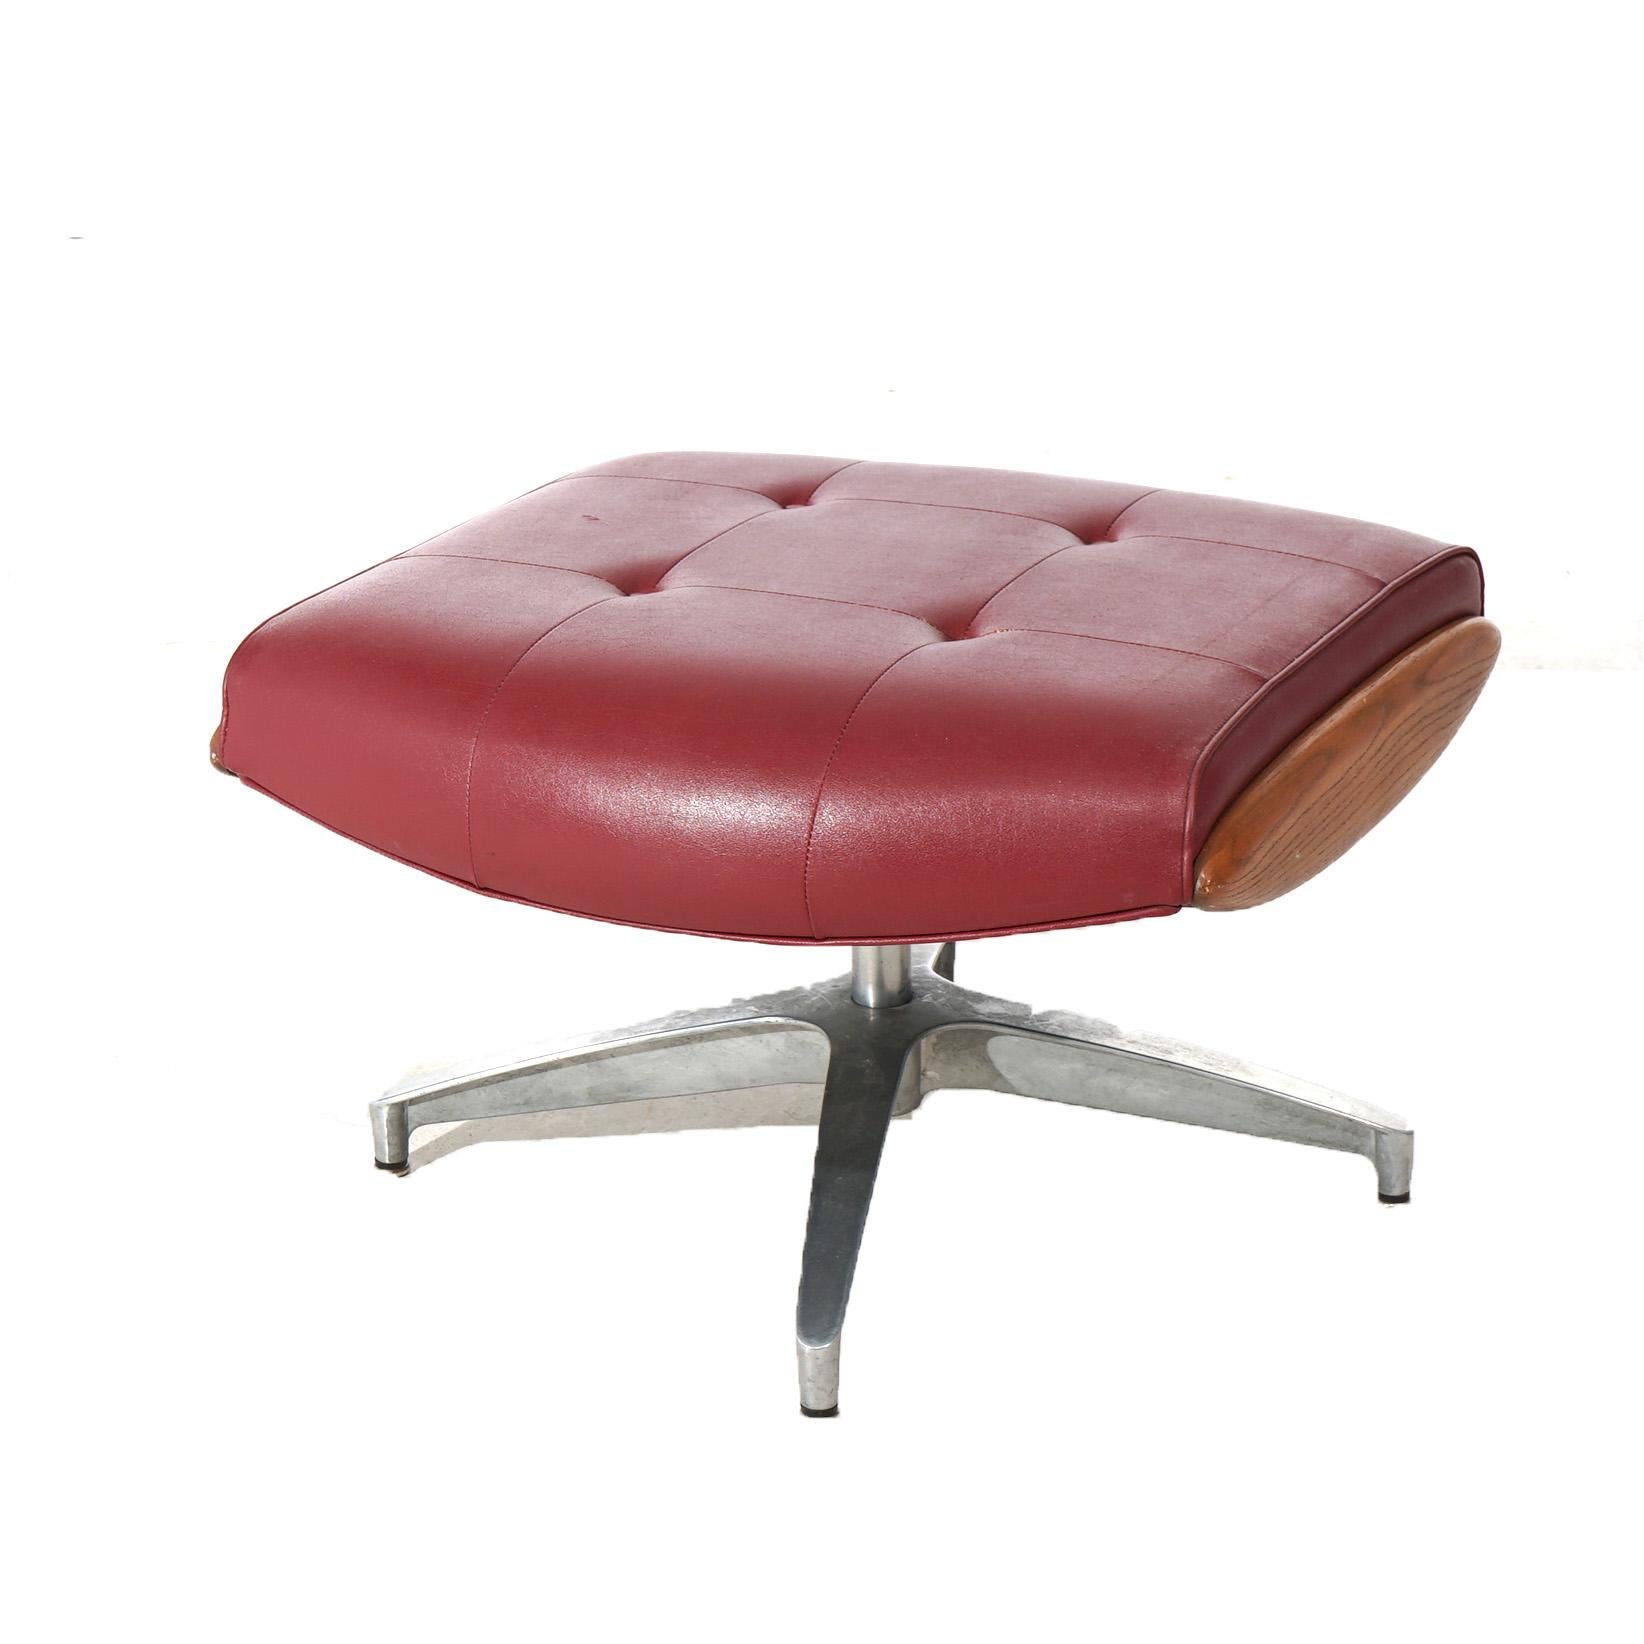 A Mid Century Modern Eames for Miller ottoman offers faux leather button seat in wood frame raised on chrome legs, c1950

Measures - 16.25